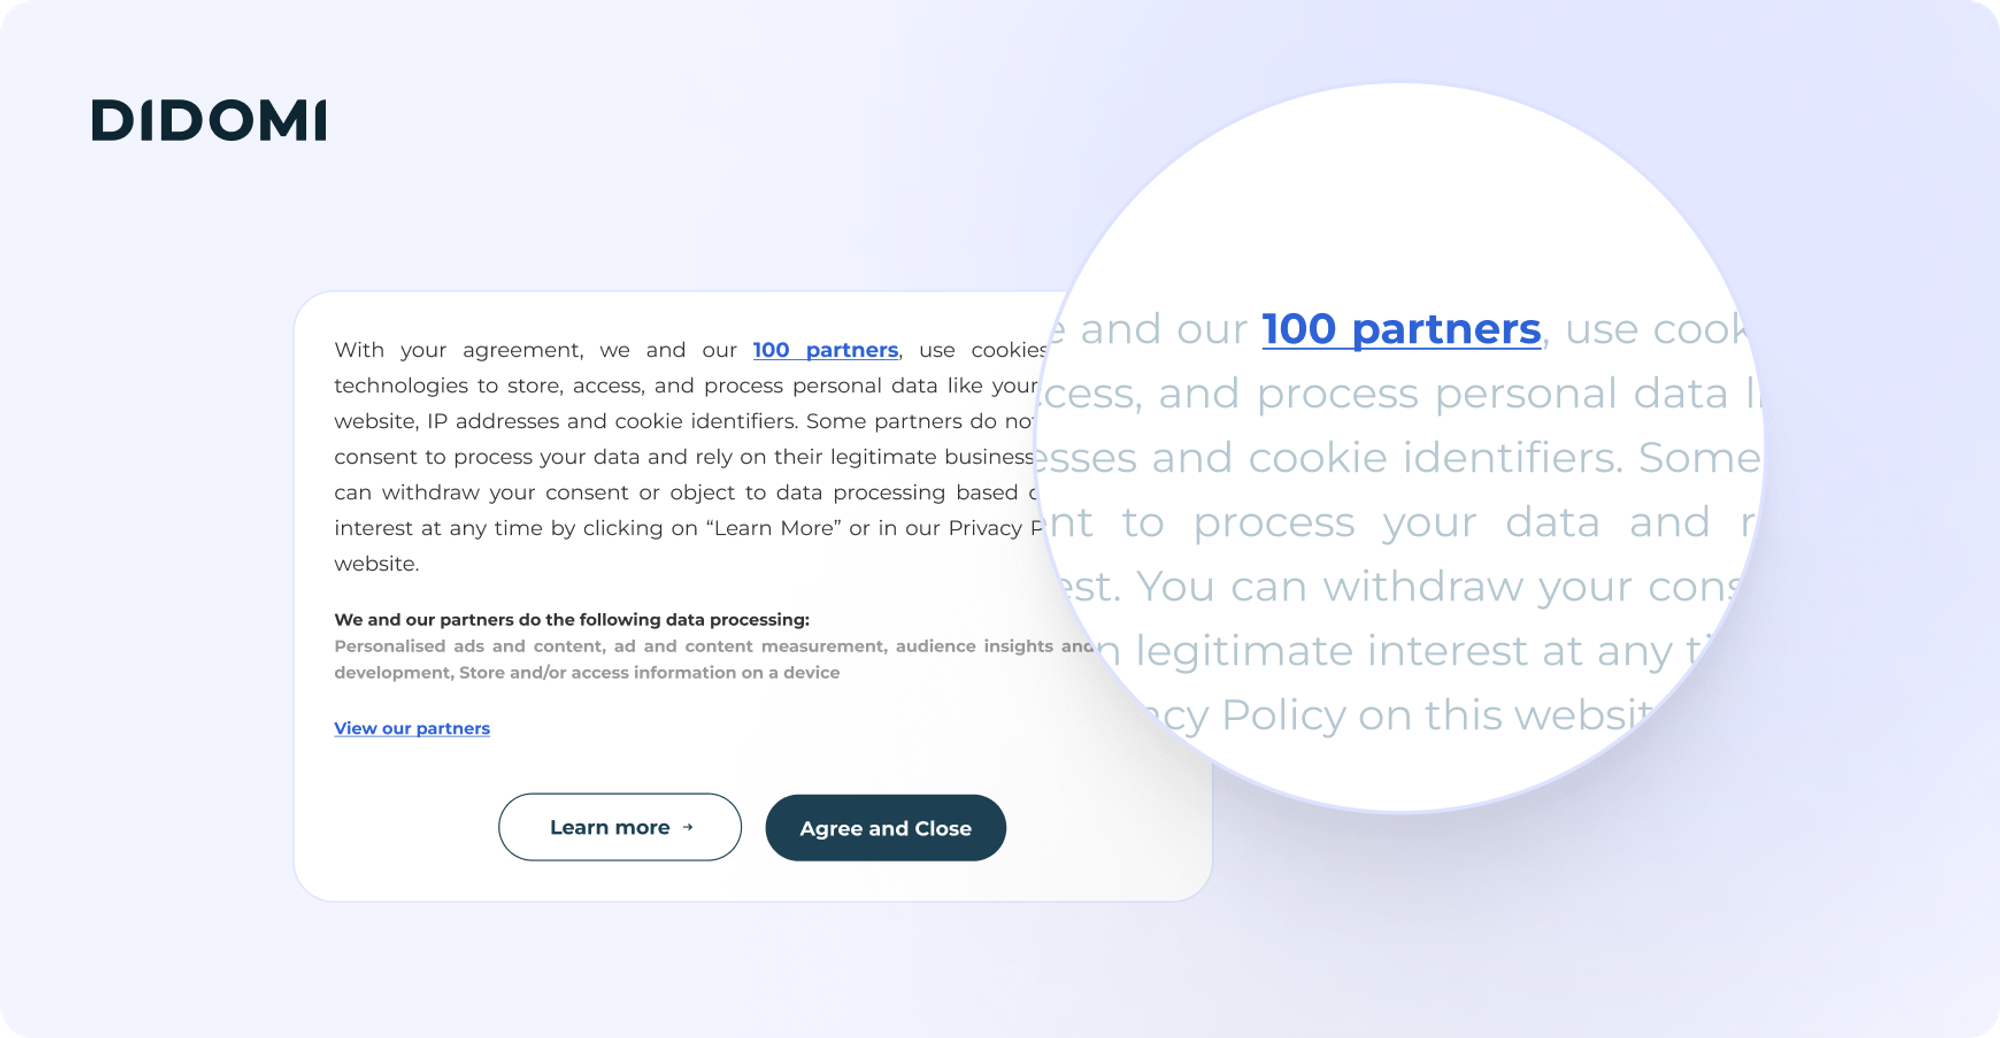 mockup of a consent banner with a zoomed in circle on the section of the text mentioning "100 partners" in bright colors